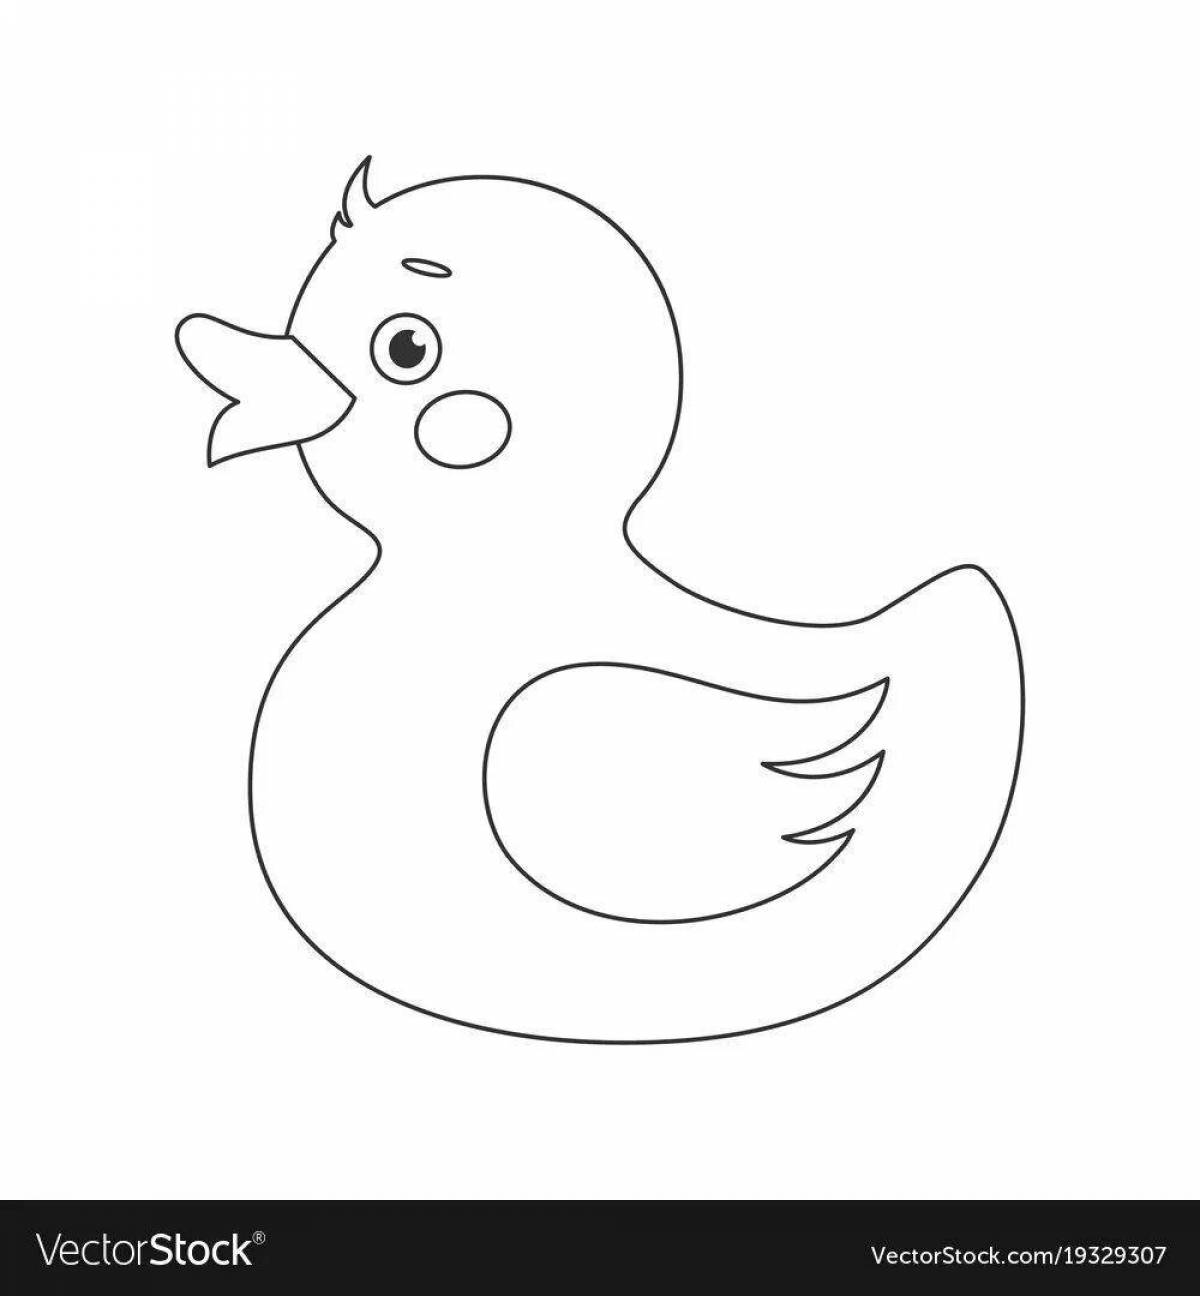 Outstanding Dymkovo duck, second youngest coloring page